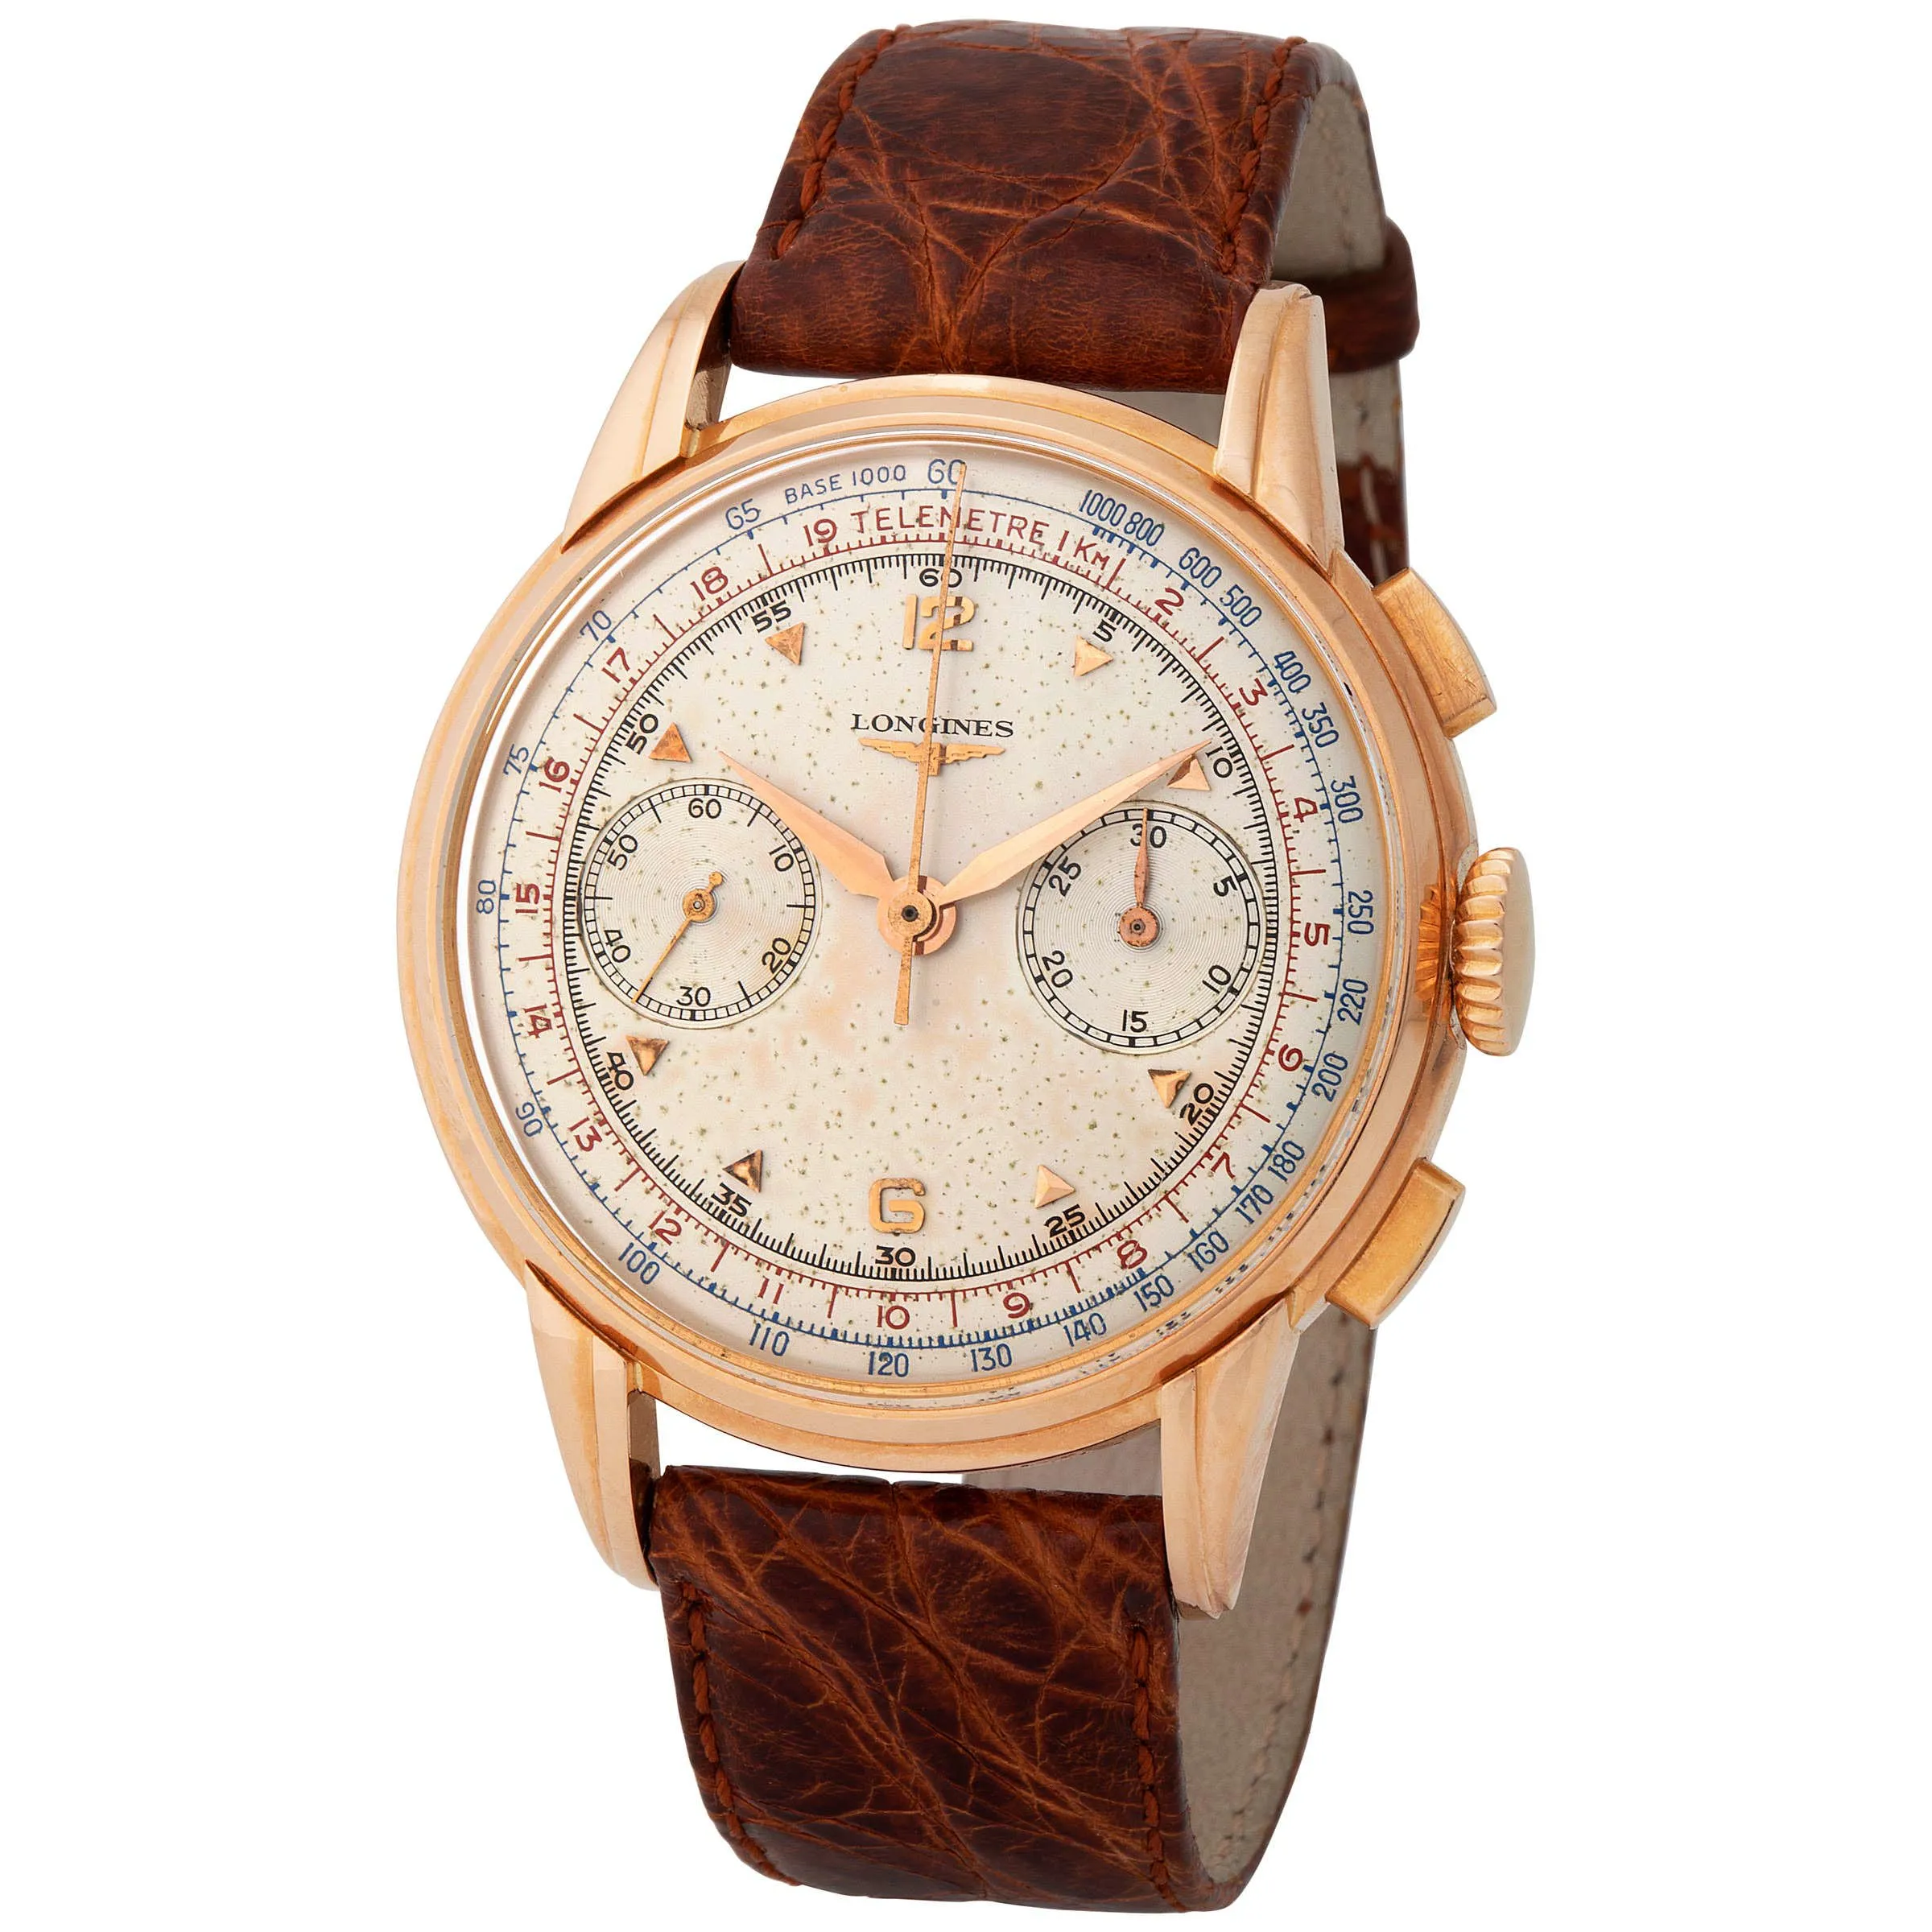 Longines Chronograph 5953-2 37mm Rose gold Champagne